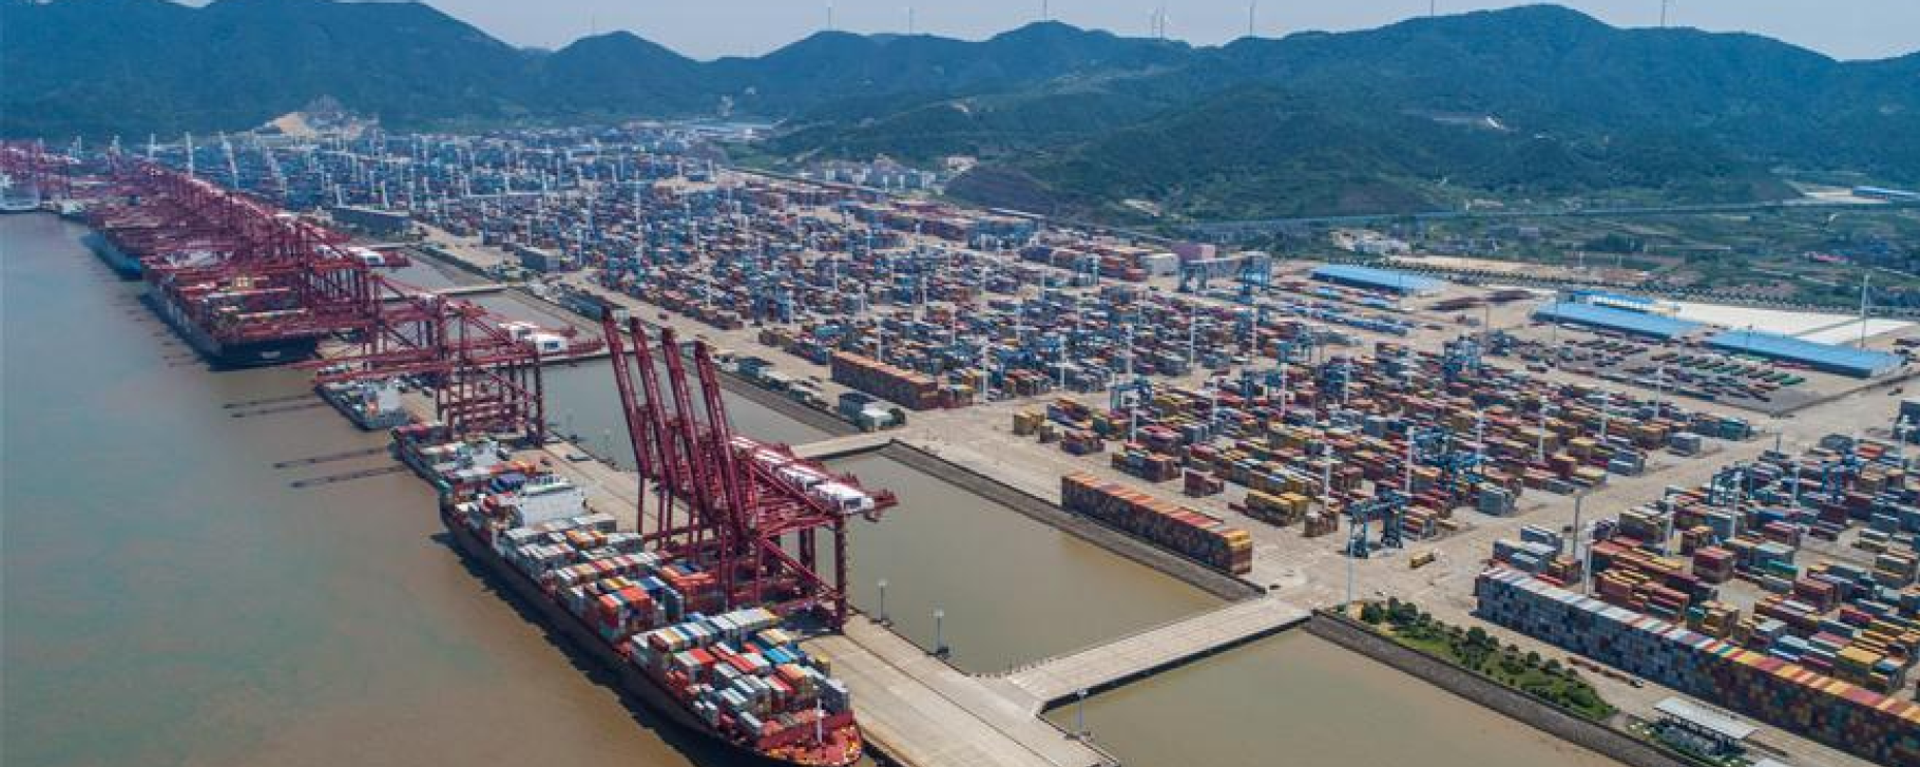 Aerial photo taken on July 12, 2017 shows the container pier of Zhoushan Port in Ningbo City, east China's Zhejiang Province. In the first half of 2017, Zhoushan Port handled 515 million tonnes cargoes, up 11.3 percent year-on-year, and 12.39 million TEU (twenty-foot equivalent unit) containers, up 14.6 percent year-on-year. - Sputnik India, 1920, 11.04.2023